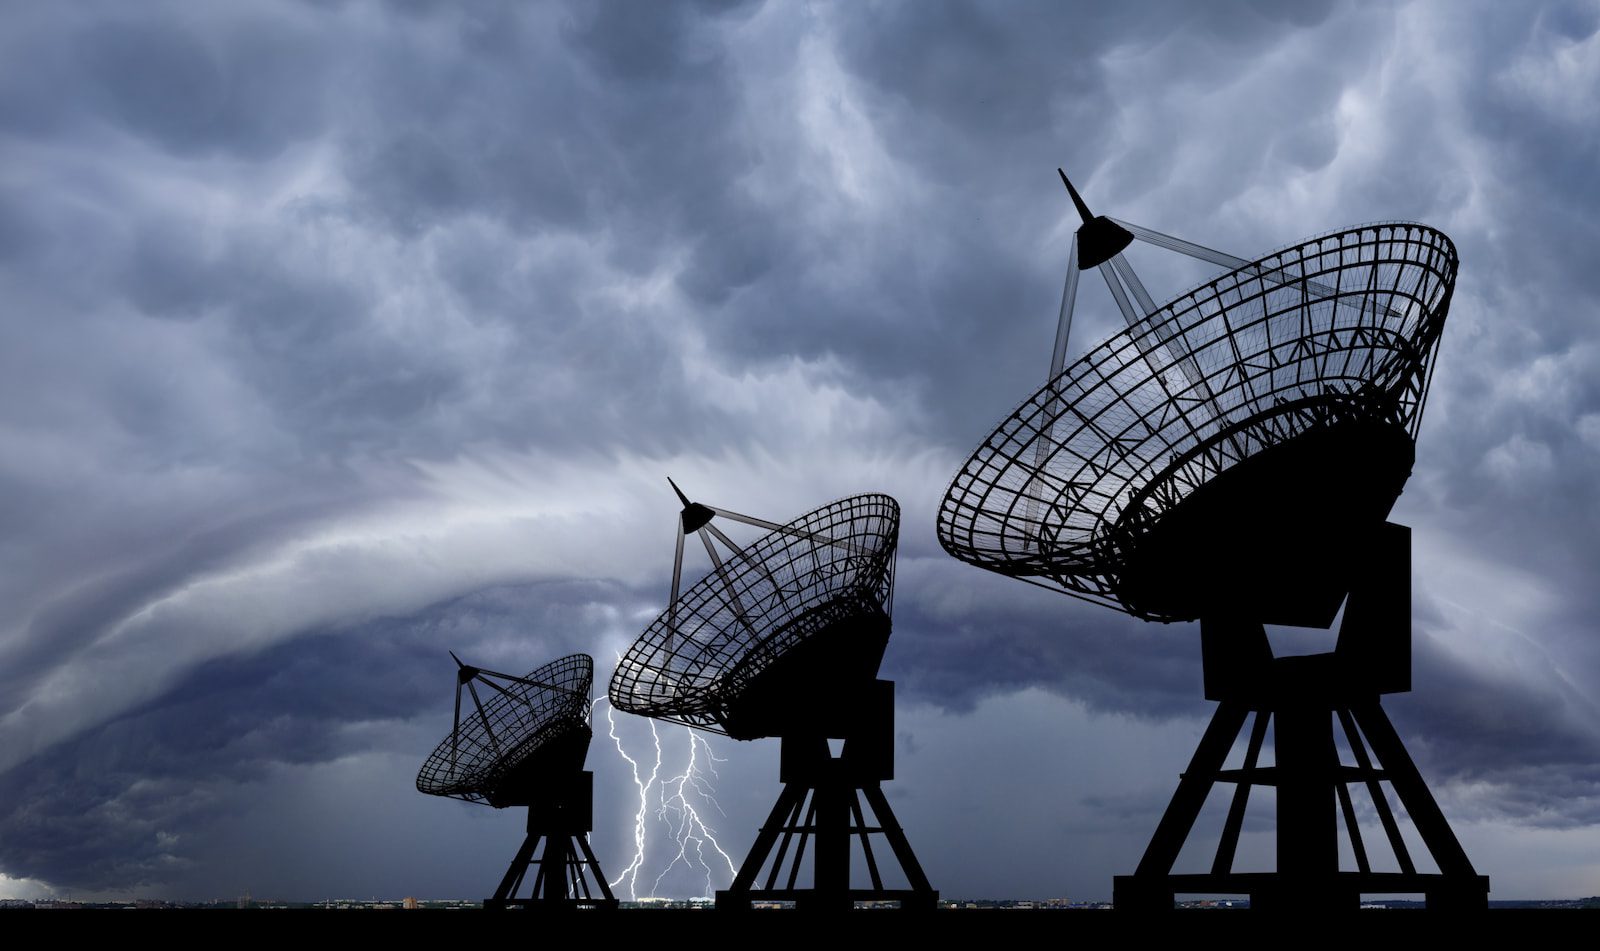 is microwave internet affected by weather?